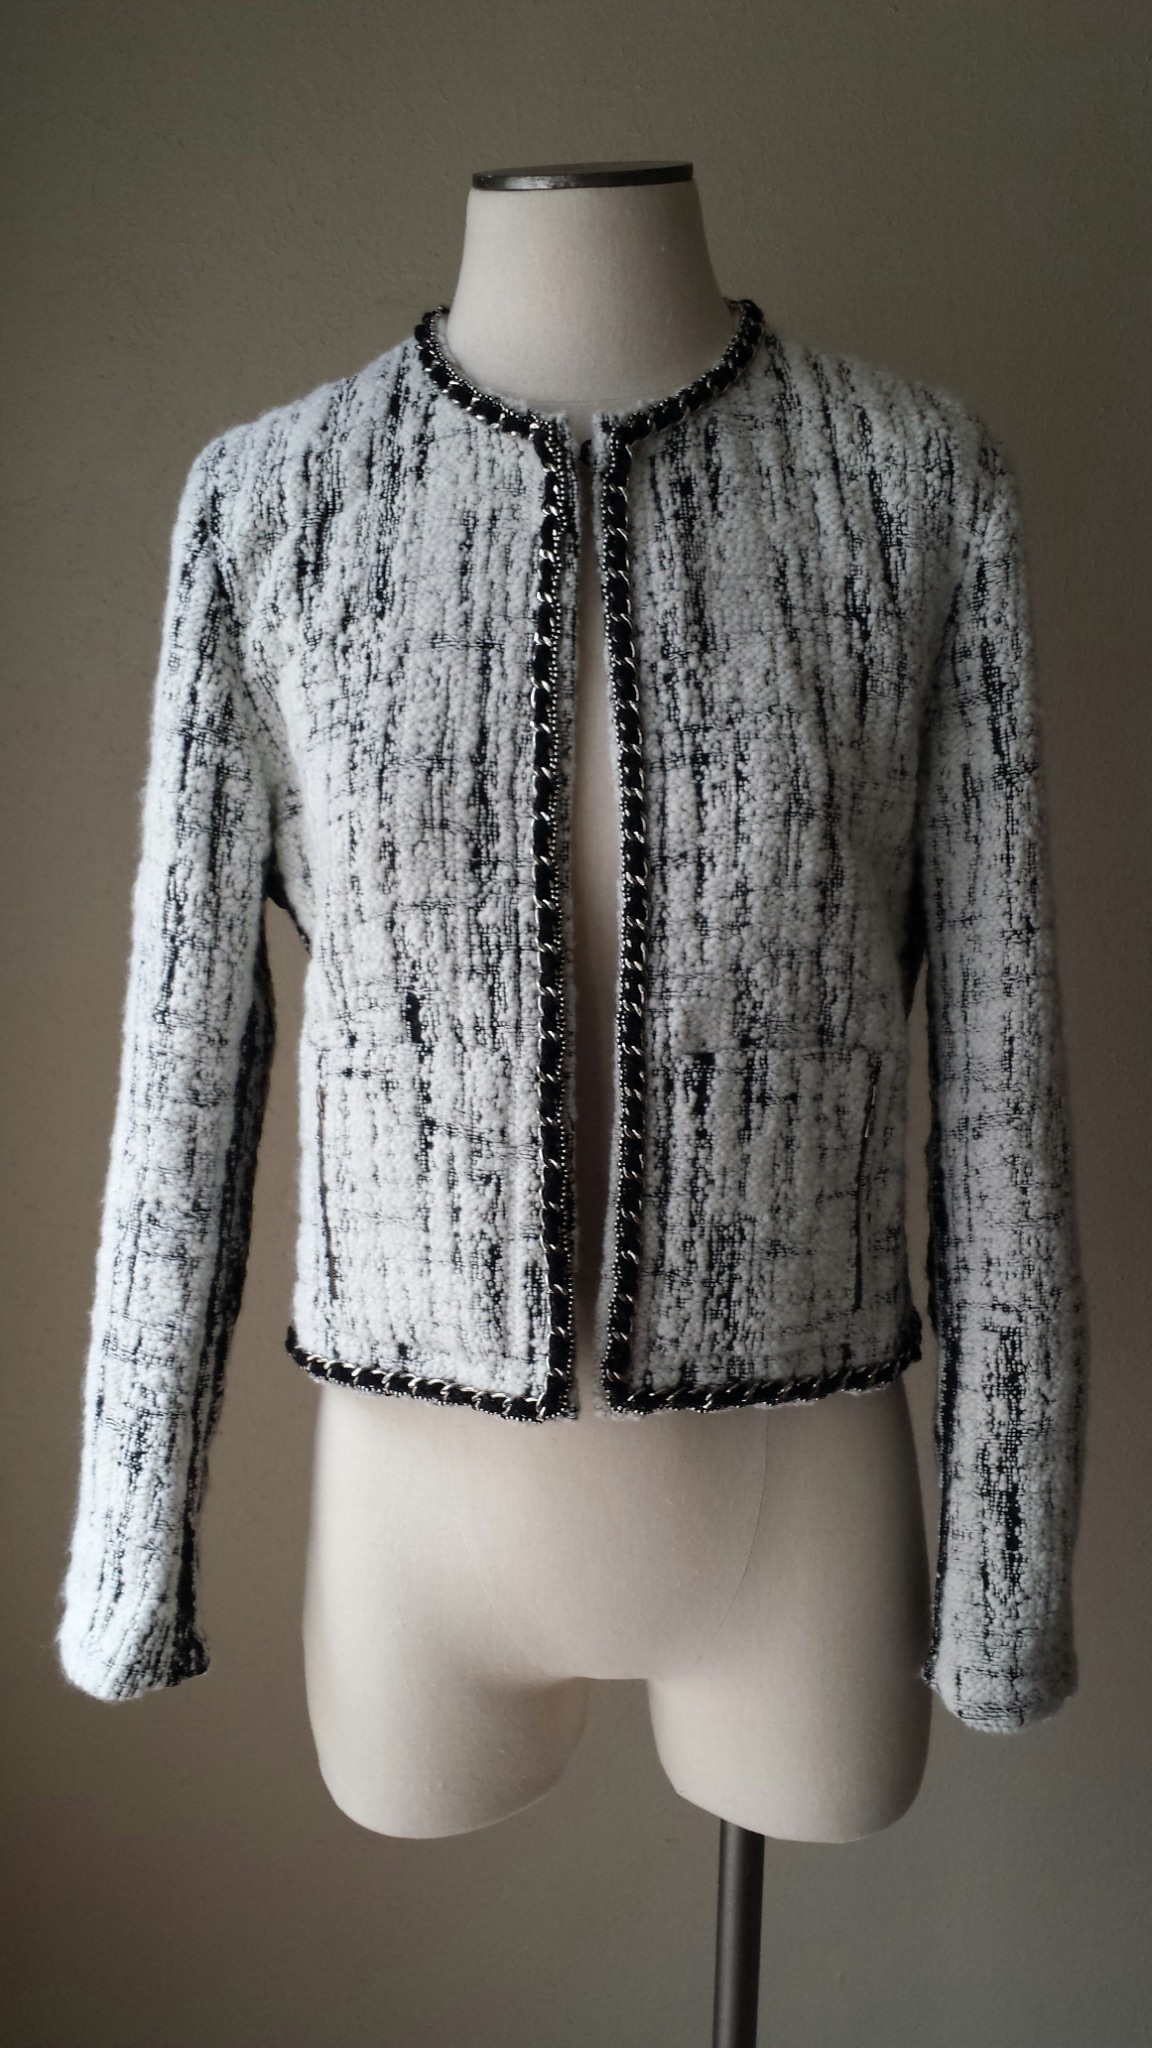 Chanel-style Jacket – Sewing Projects | BurdaStyle.com